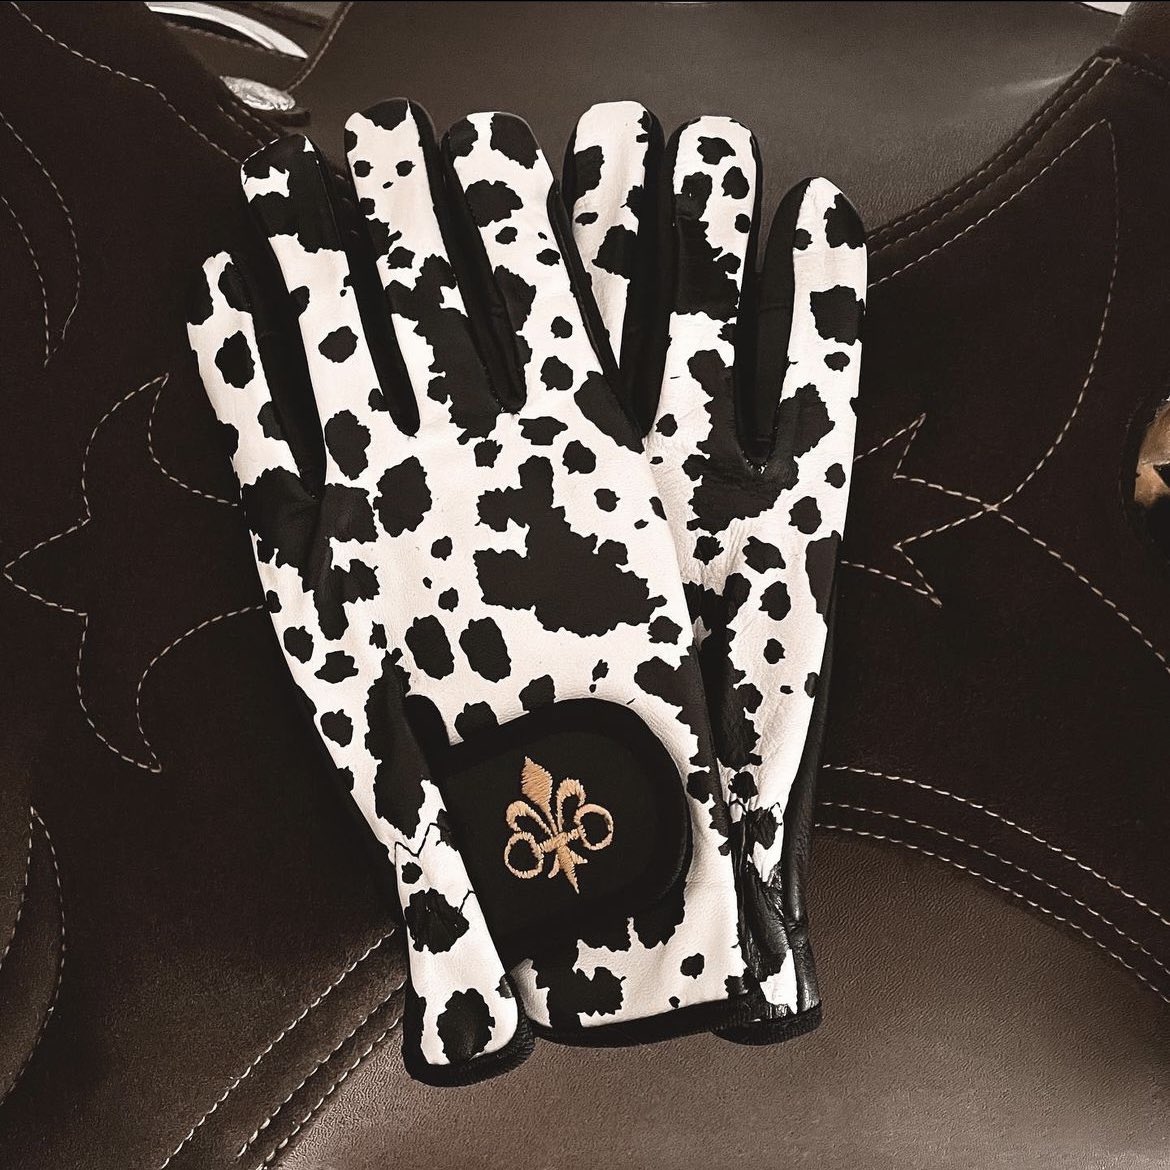 ★ RODEO RIDING GLOVES ★ as soon as I saw these I wanted them immediately, super soft leather, so comfortable to wear, a Cowgirls dream Riding Gloves. I love them so much! 🐄 from @shop_clovis